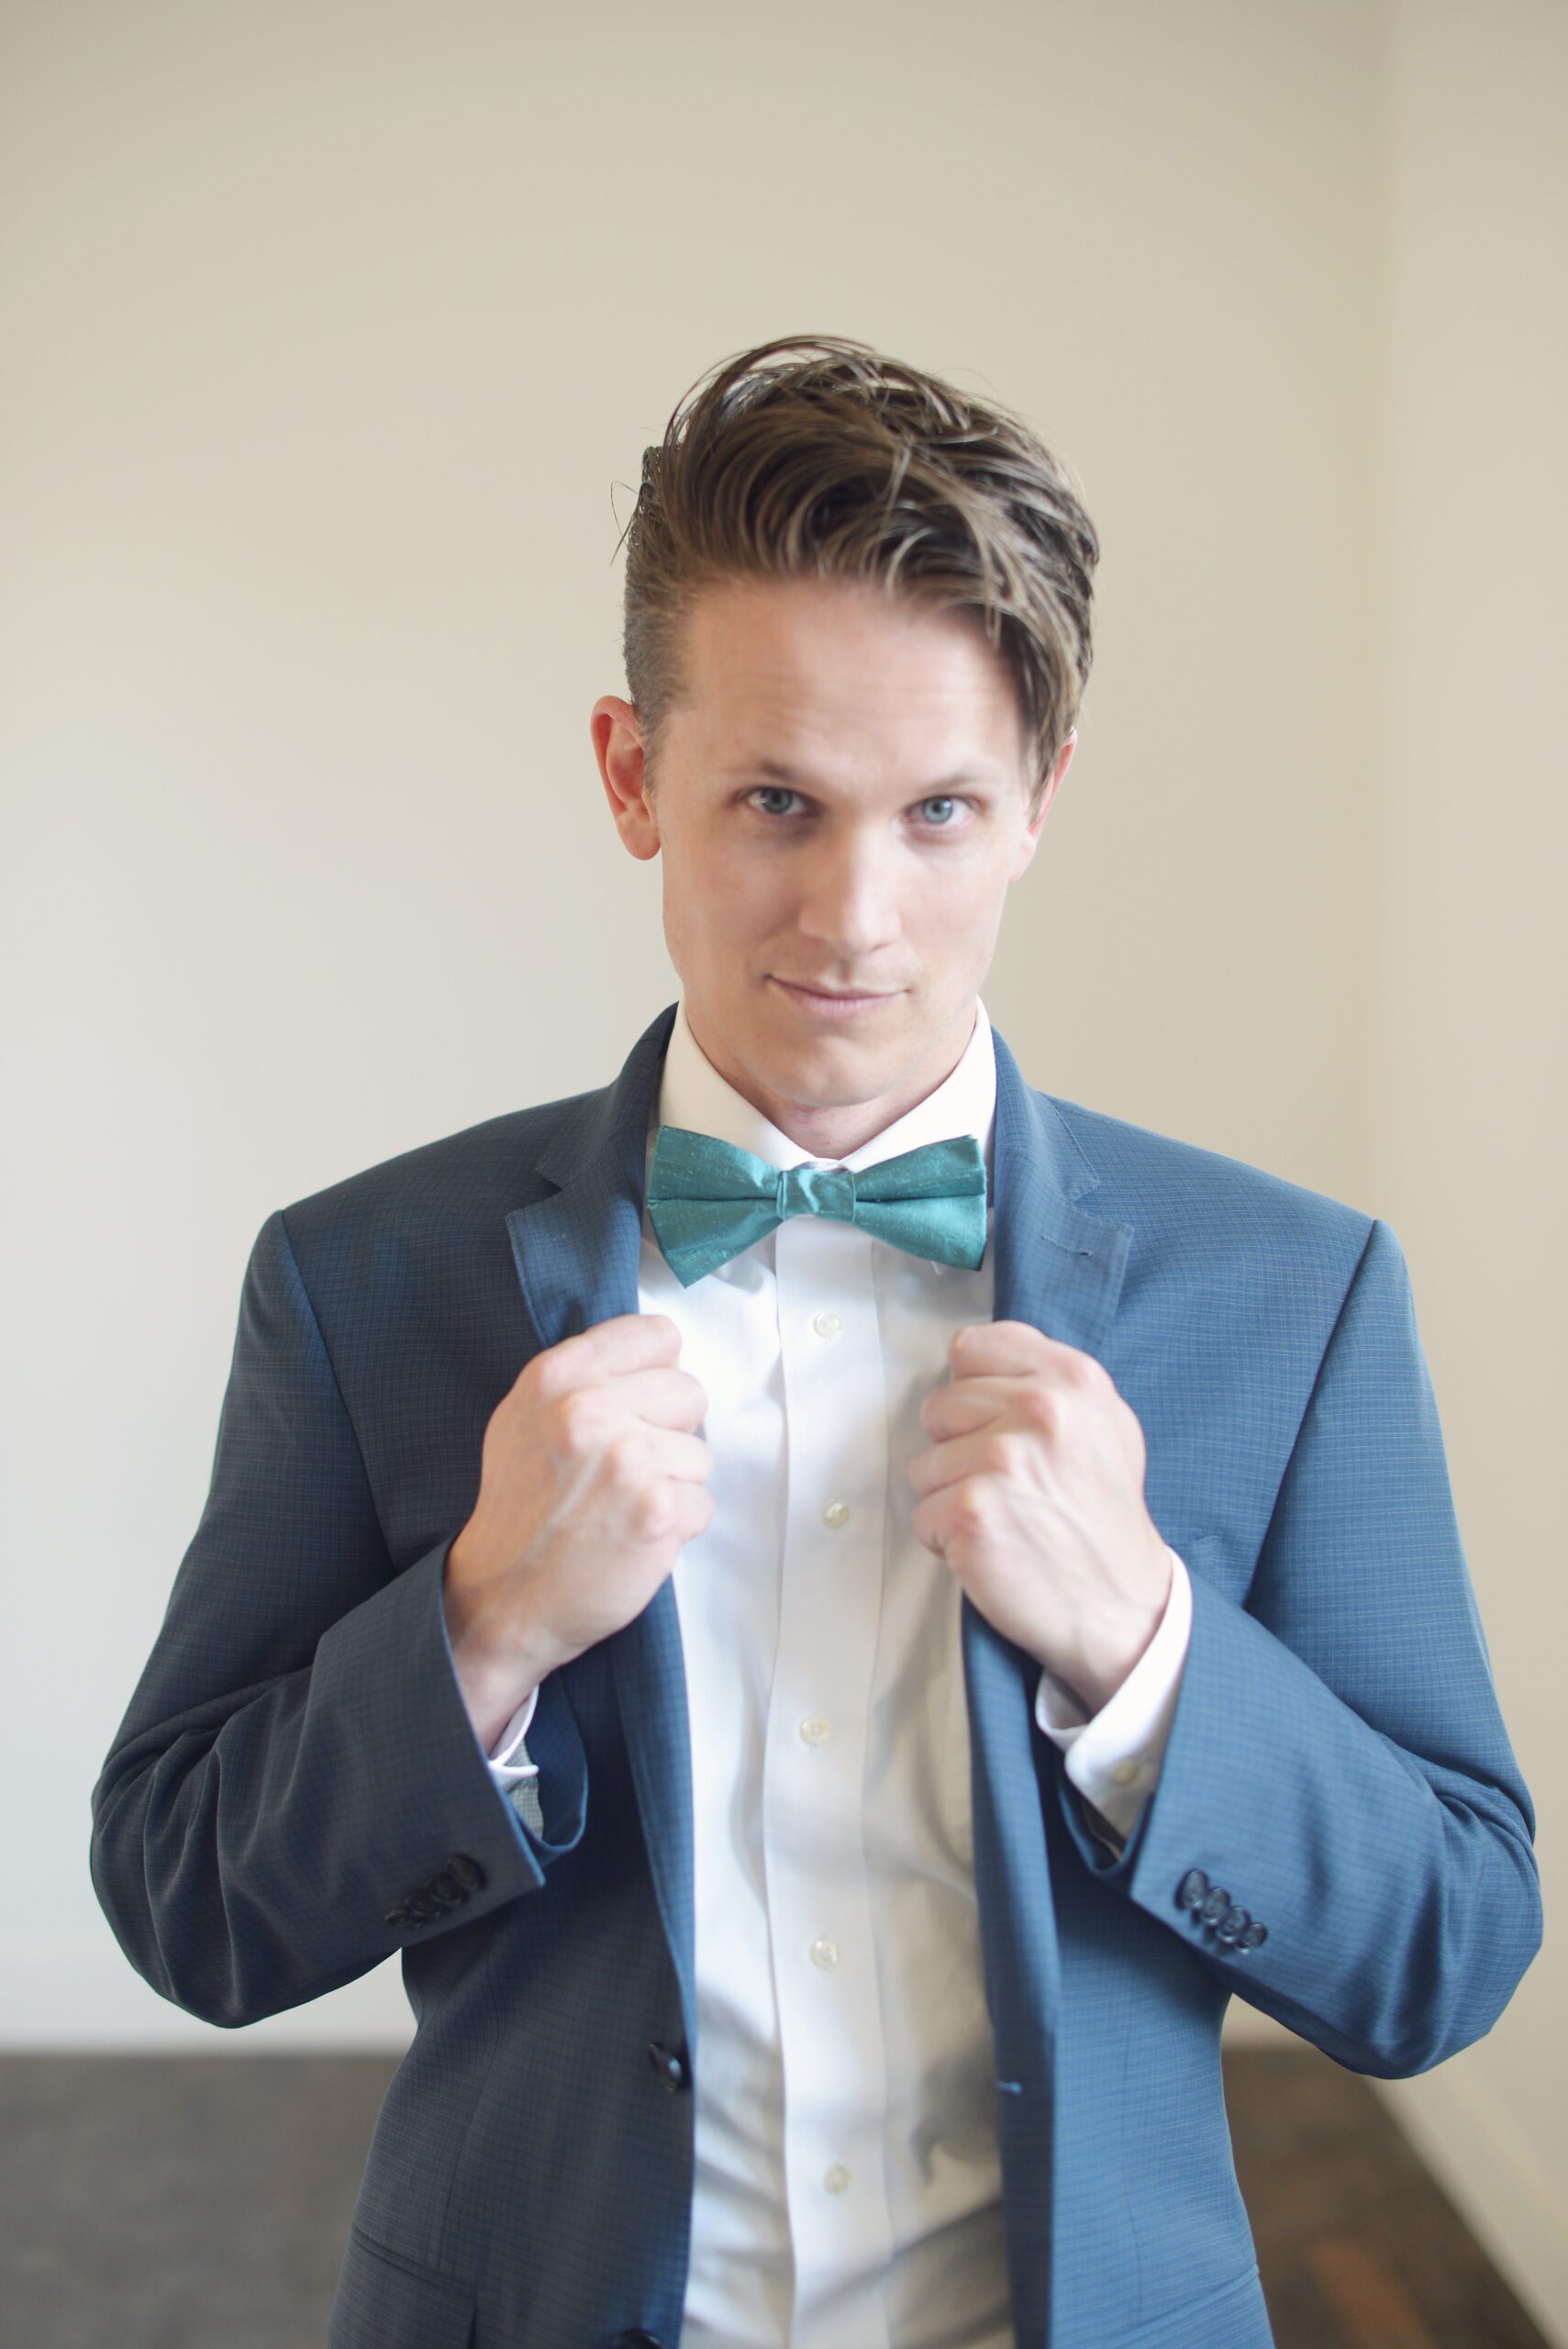 A photo of a man wearing a teal pure silk bow tie